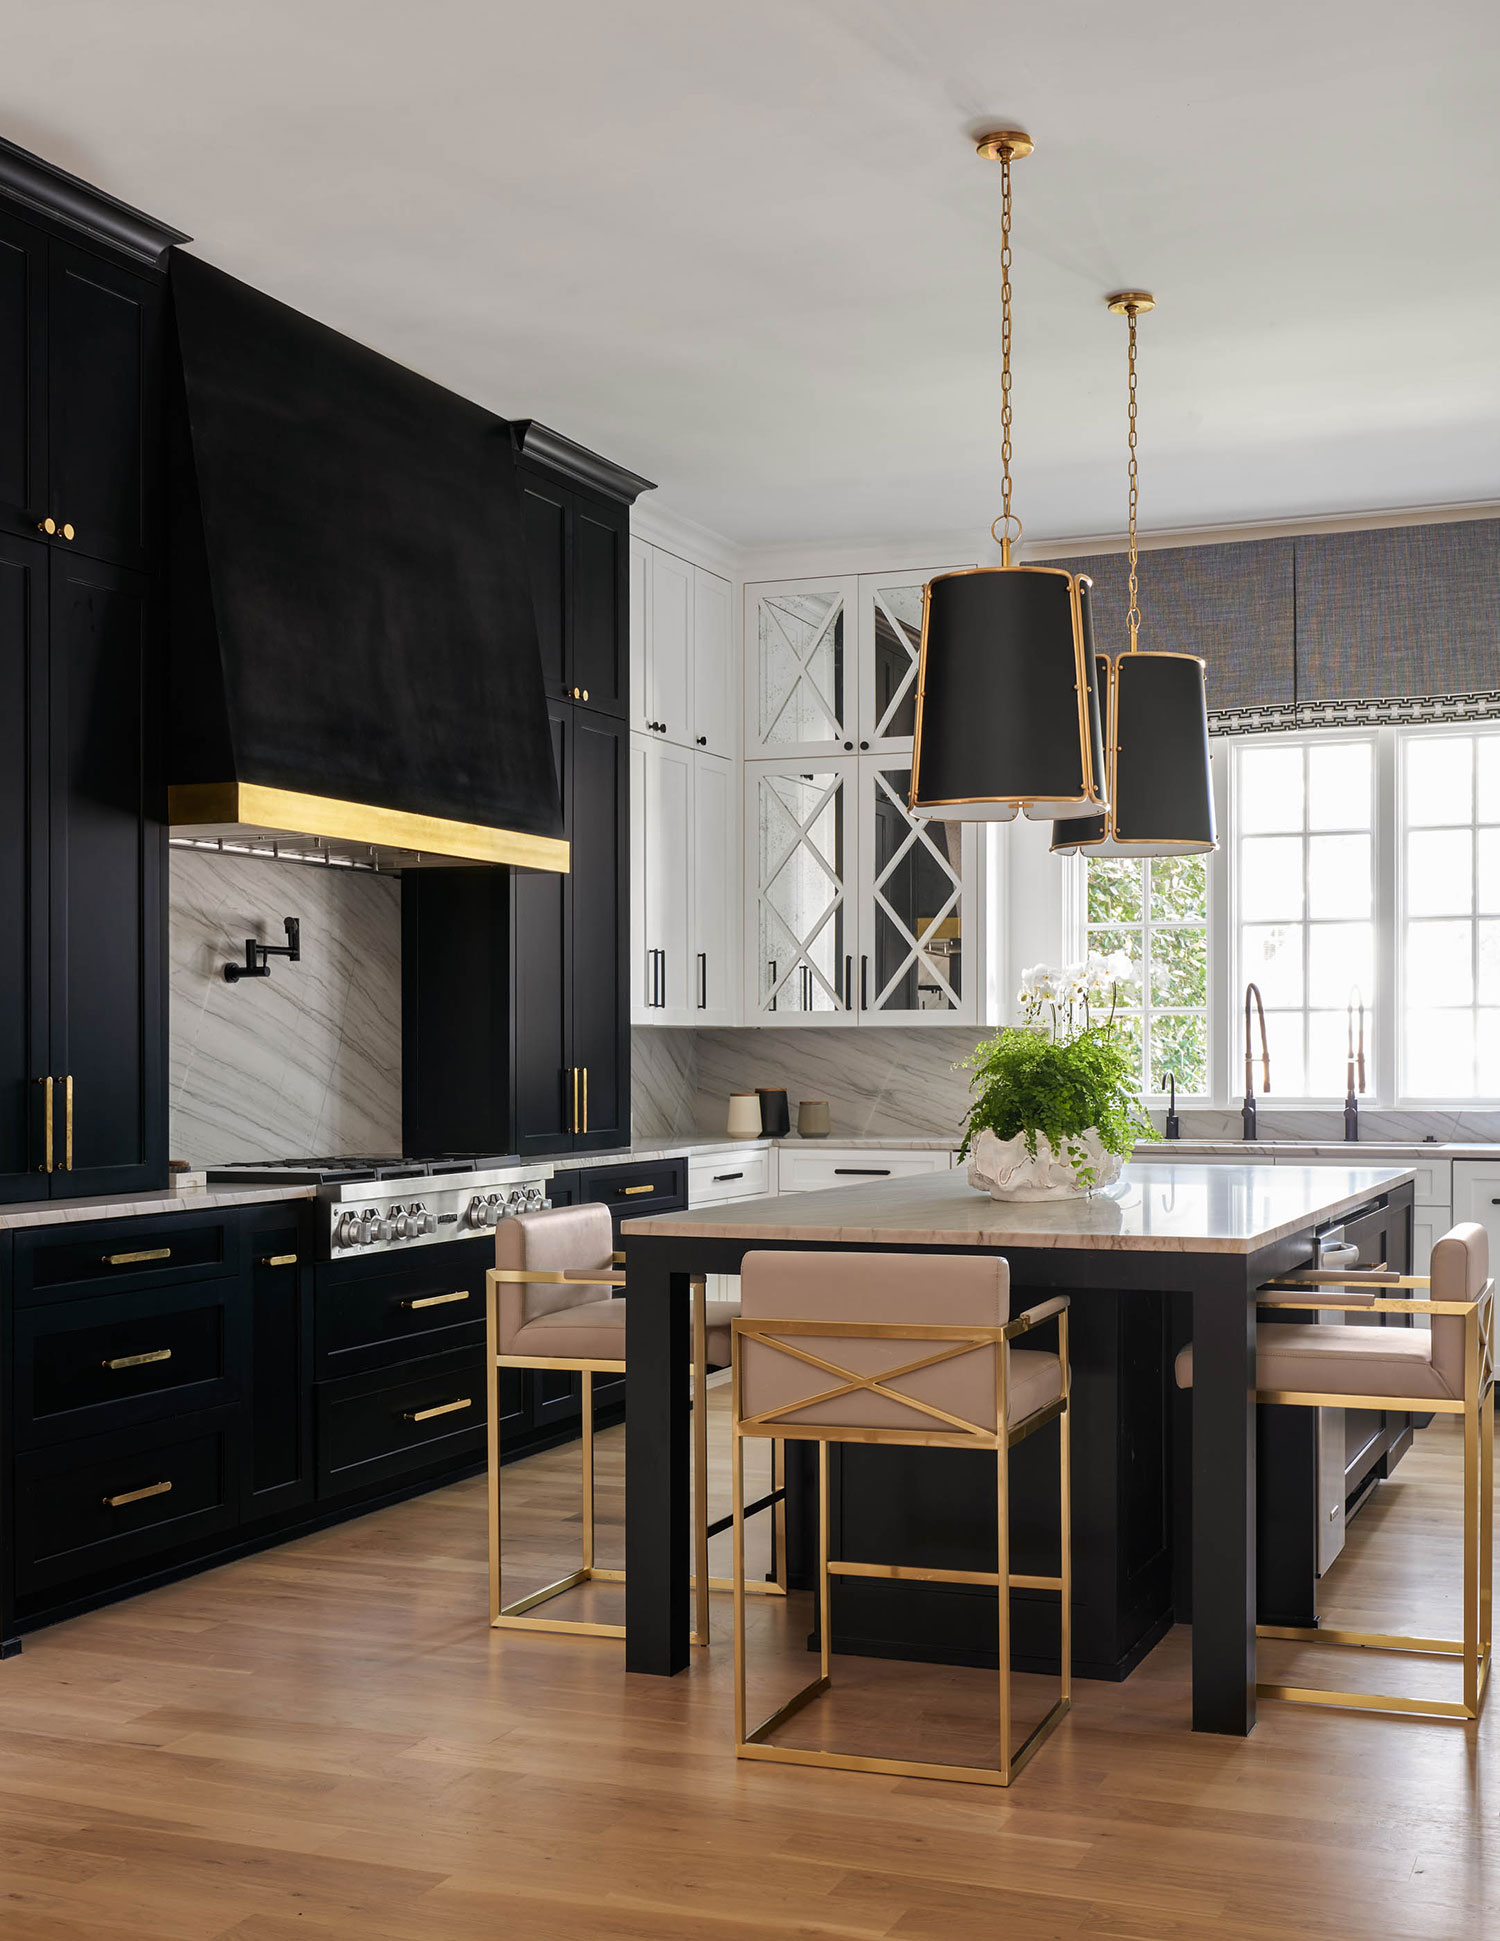 18 Kitchen Designs Designers Can't Get Enough Of